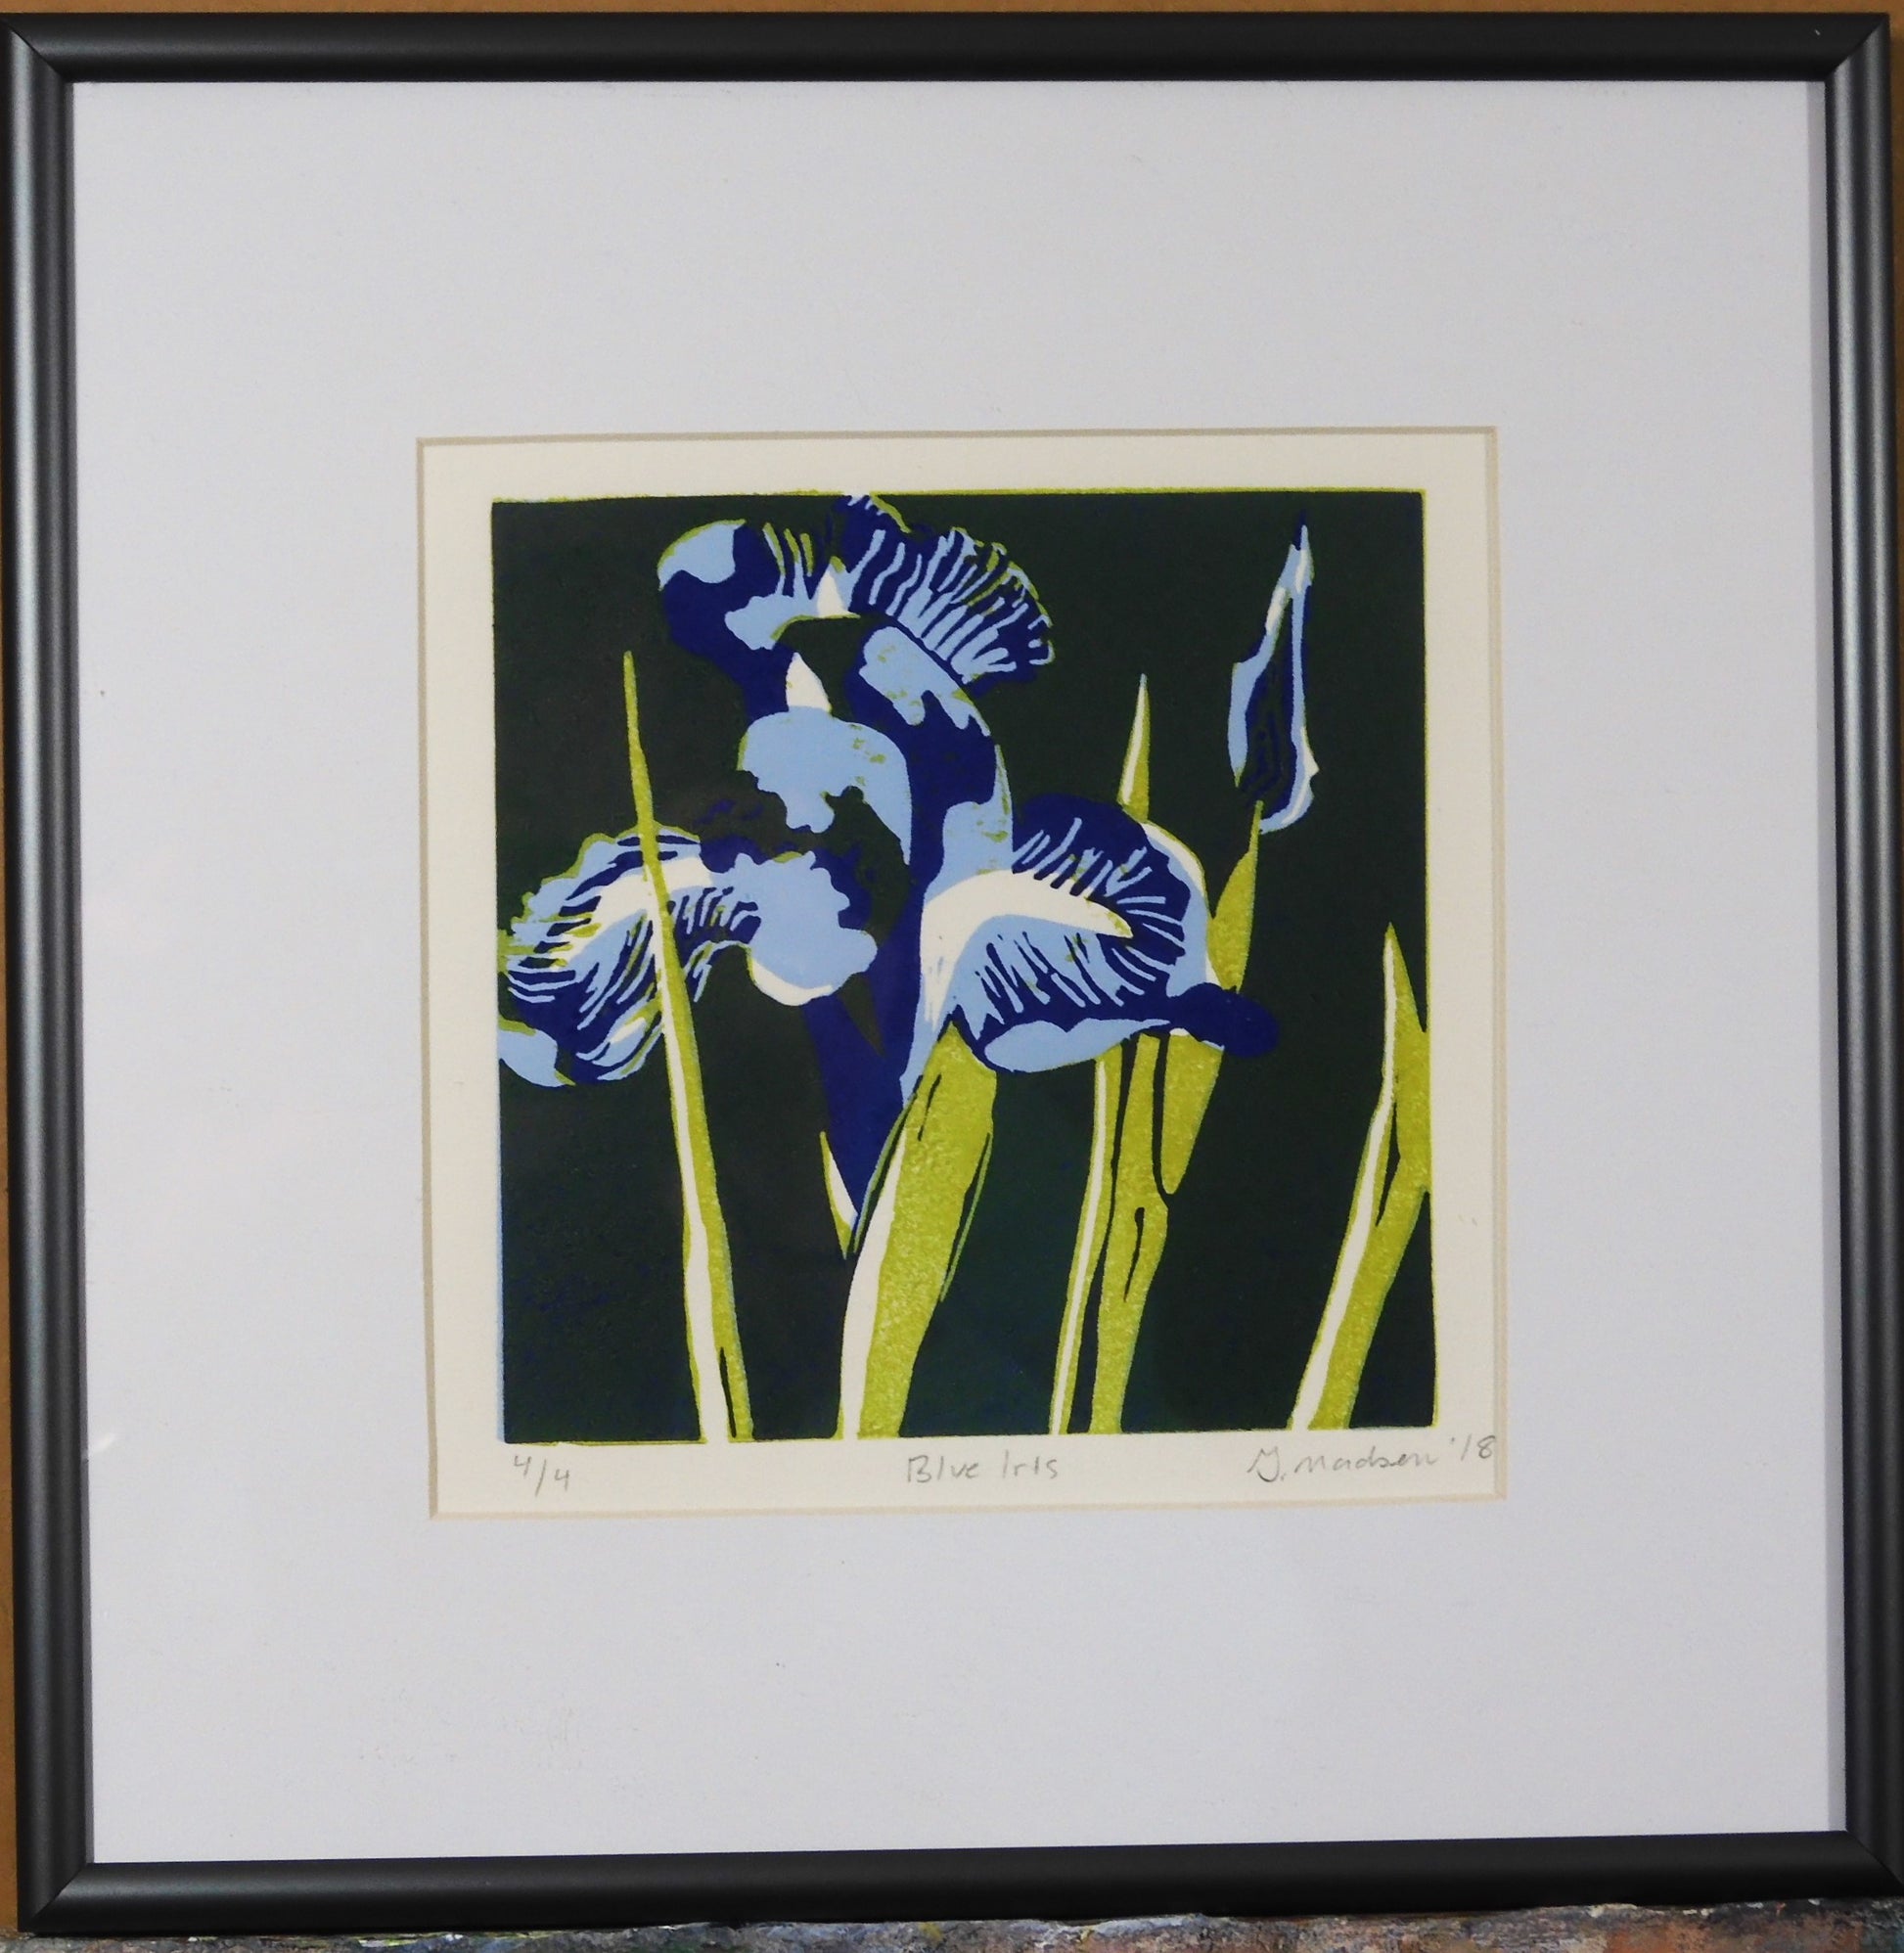 " Blue Iris " Framed Original Relief Print Artist: Ginnie Madsen  Blue Iris on a dark green background  2" white matting around the relief print  5" long x 5" high print only  10" long  x 10" high x 1" inside a dark silver metal frame  Wire attached to frame for hanging  Original Relief print  # 4 of 4  Ready to brighten up any room in your home